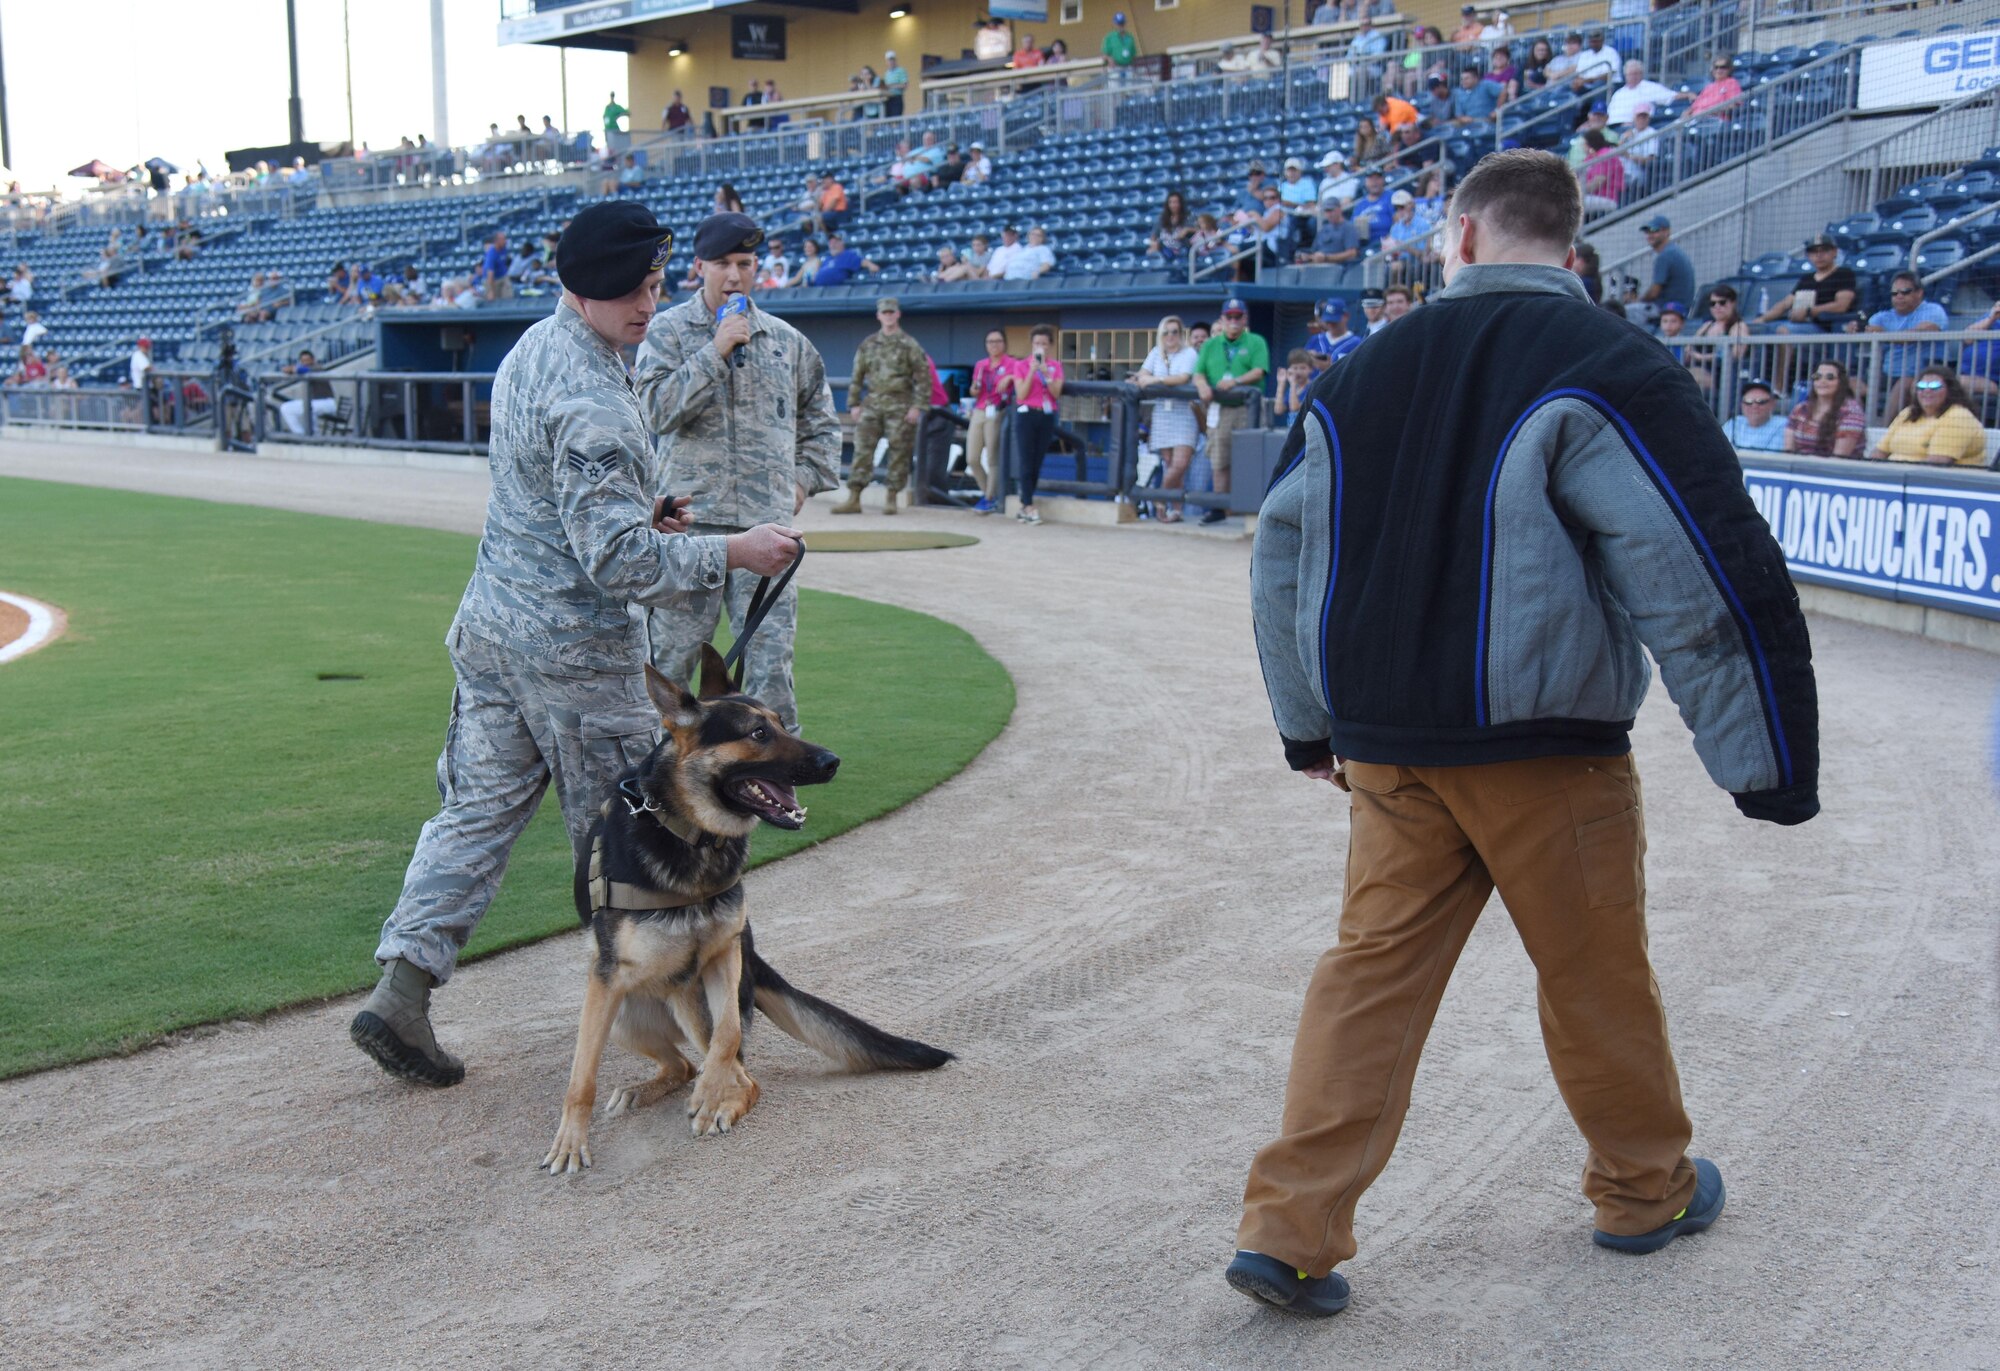 Members of the 81st Security Forces Squadron perform a military working dog demonstration during the Biloxi Shuckers Minor League Baseball team’s military appreciation night July 31, 2017, in Biloxi, Miss. The Shuckers recognized and honored service members and their families for serving the nation. (U.S. Air Force photo by Kemberly Groue)